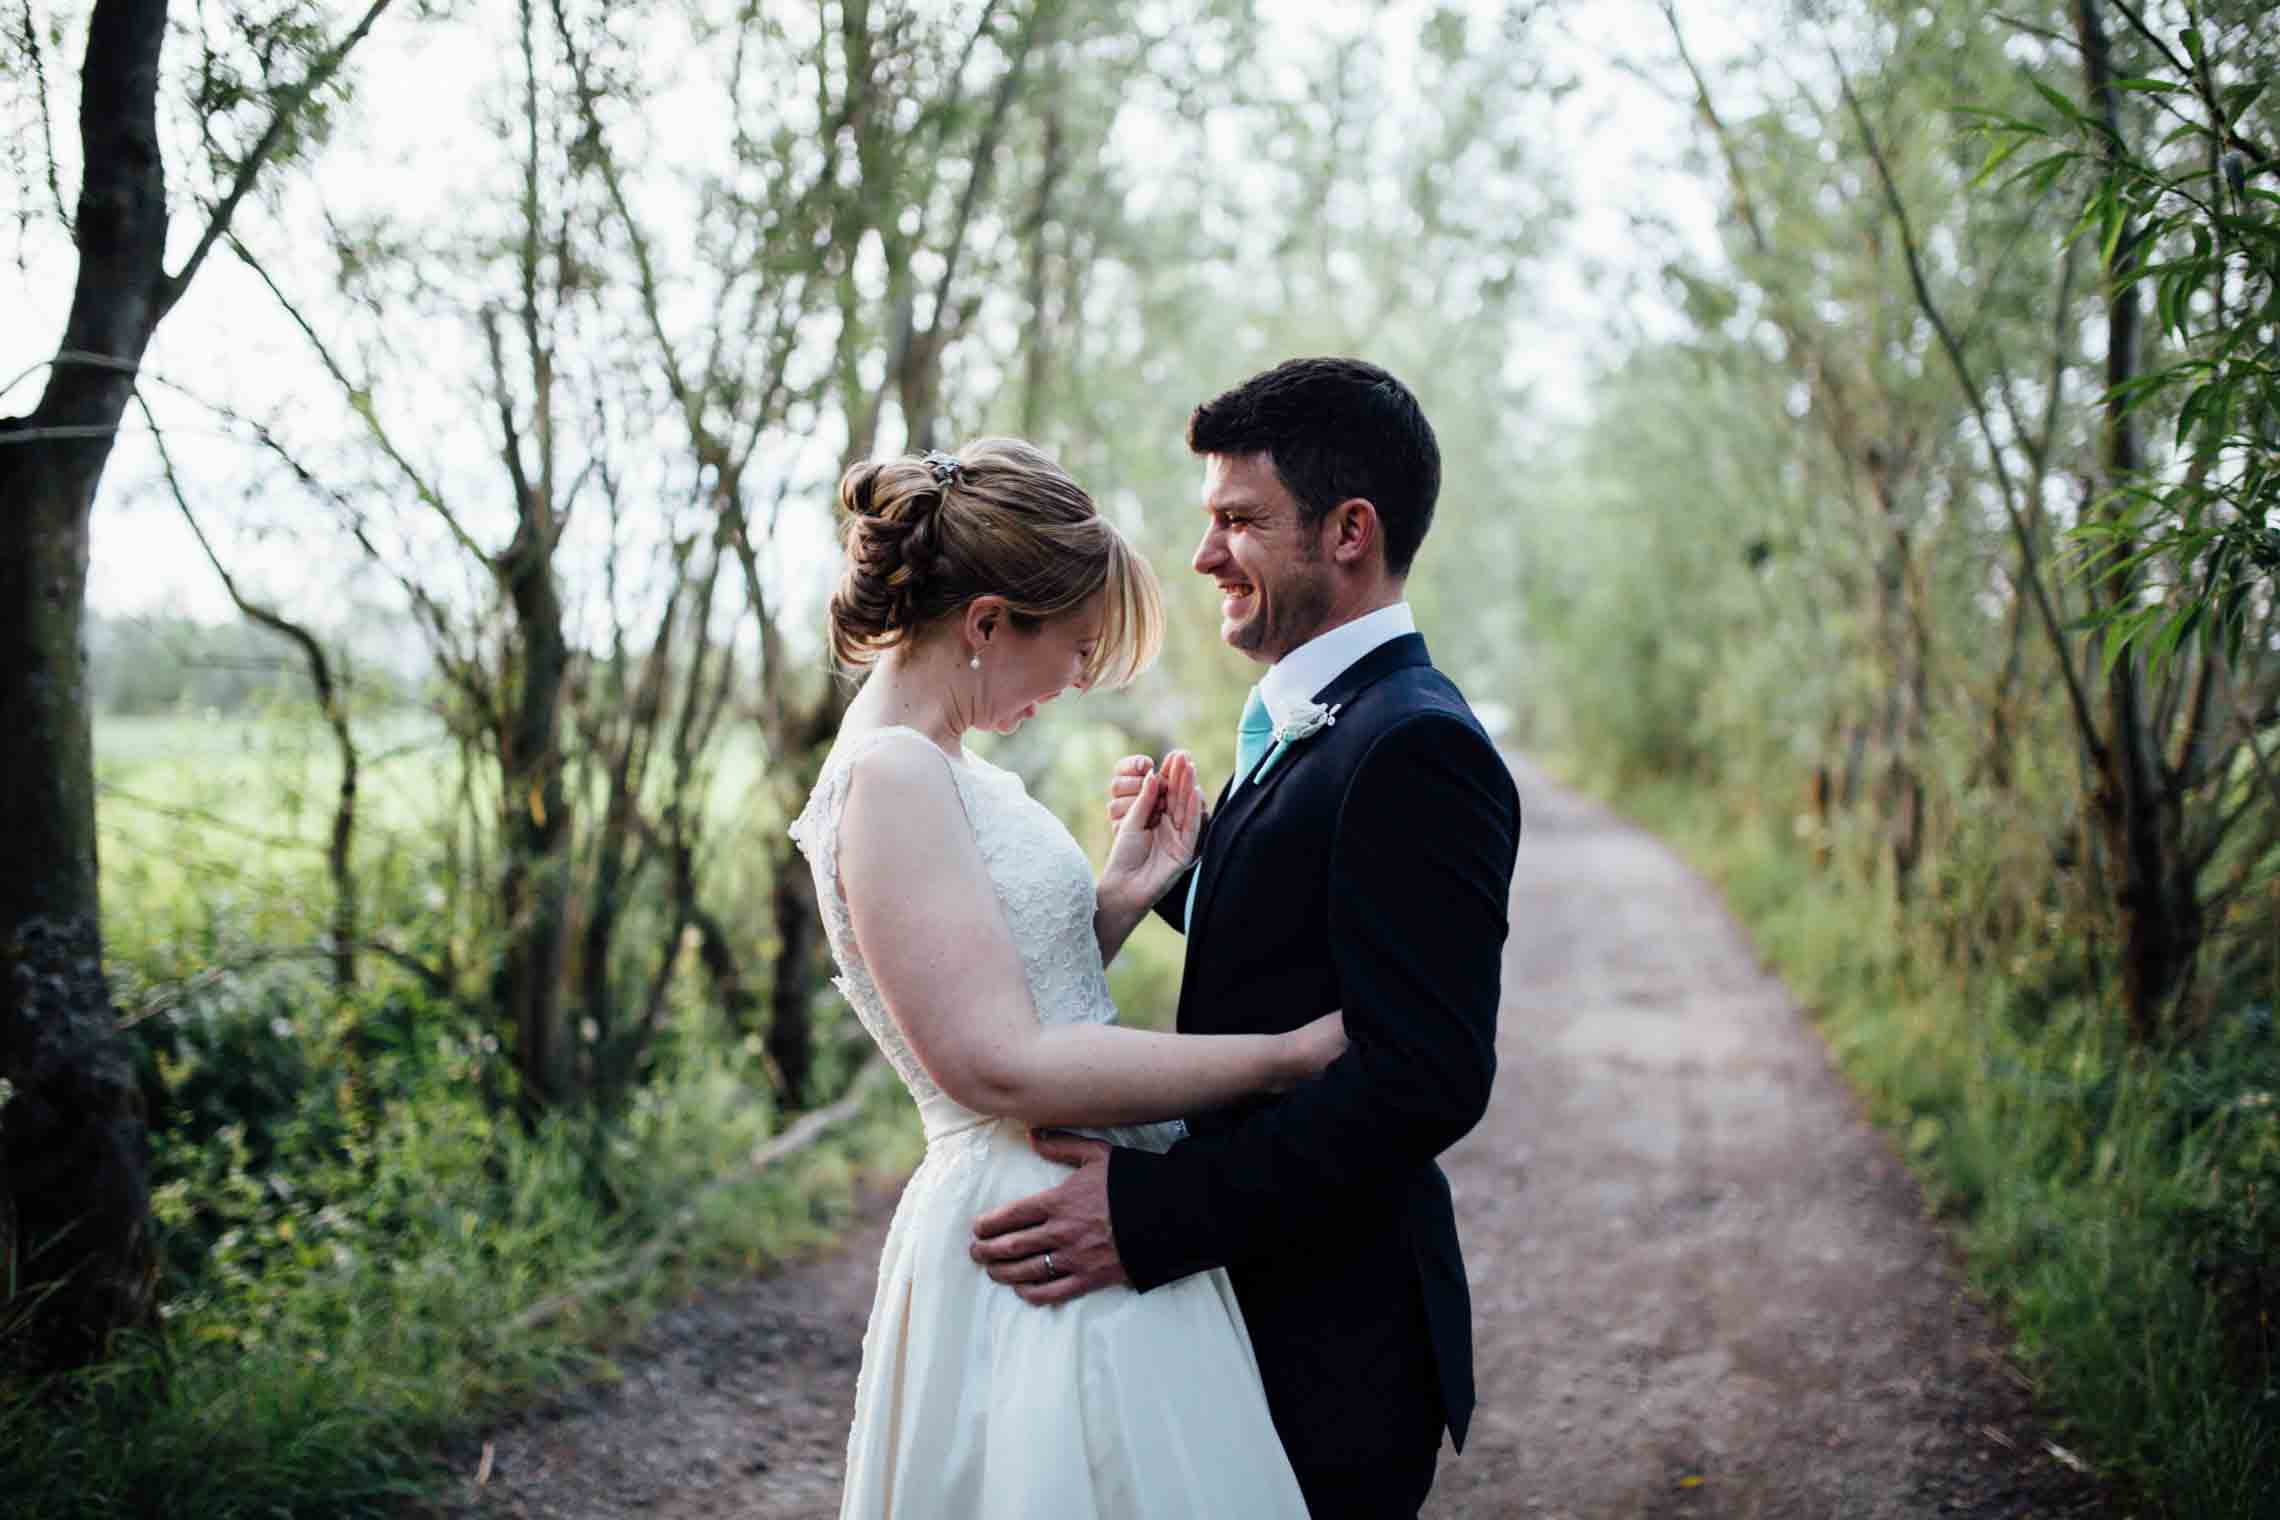 Wedding Photography of newlyweds at St Peters Brewery Hall